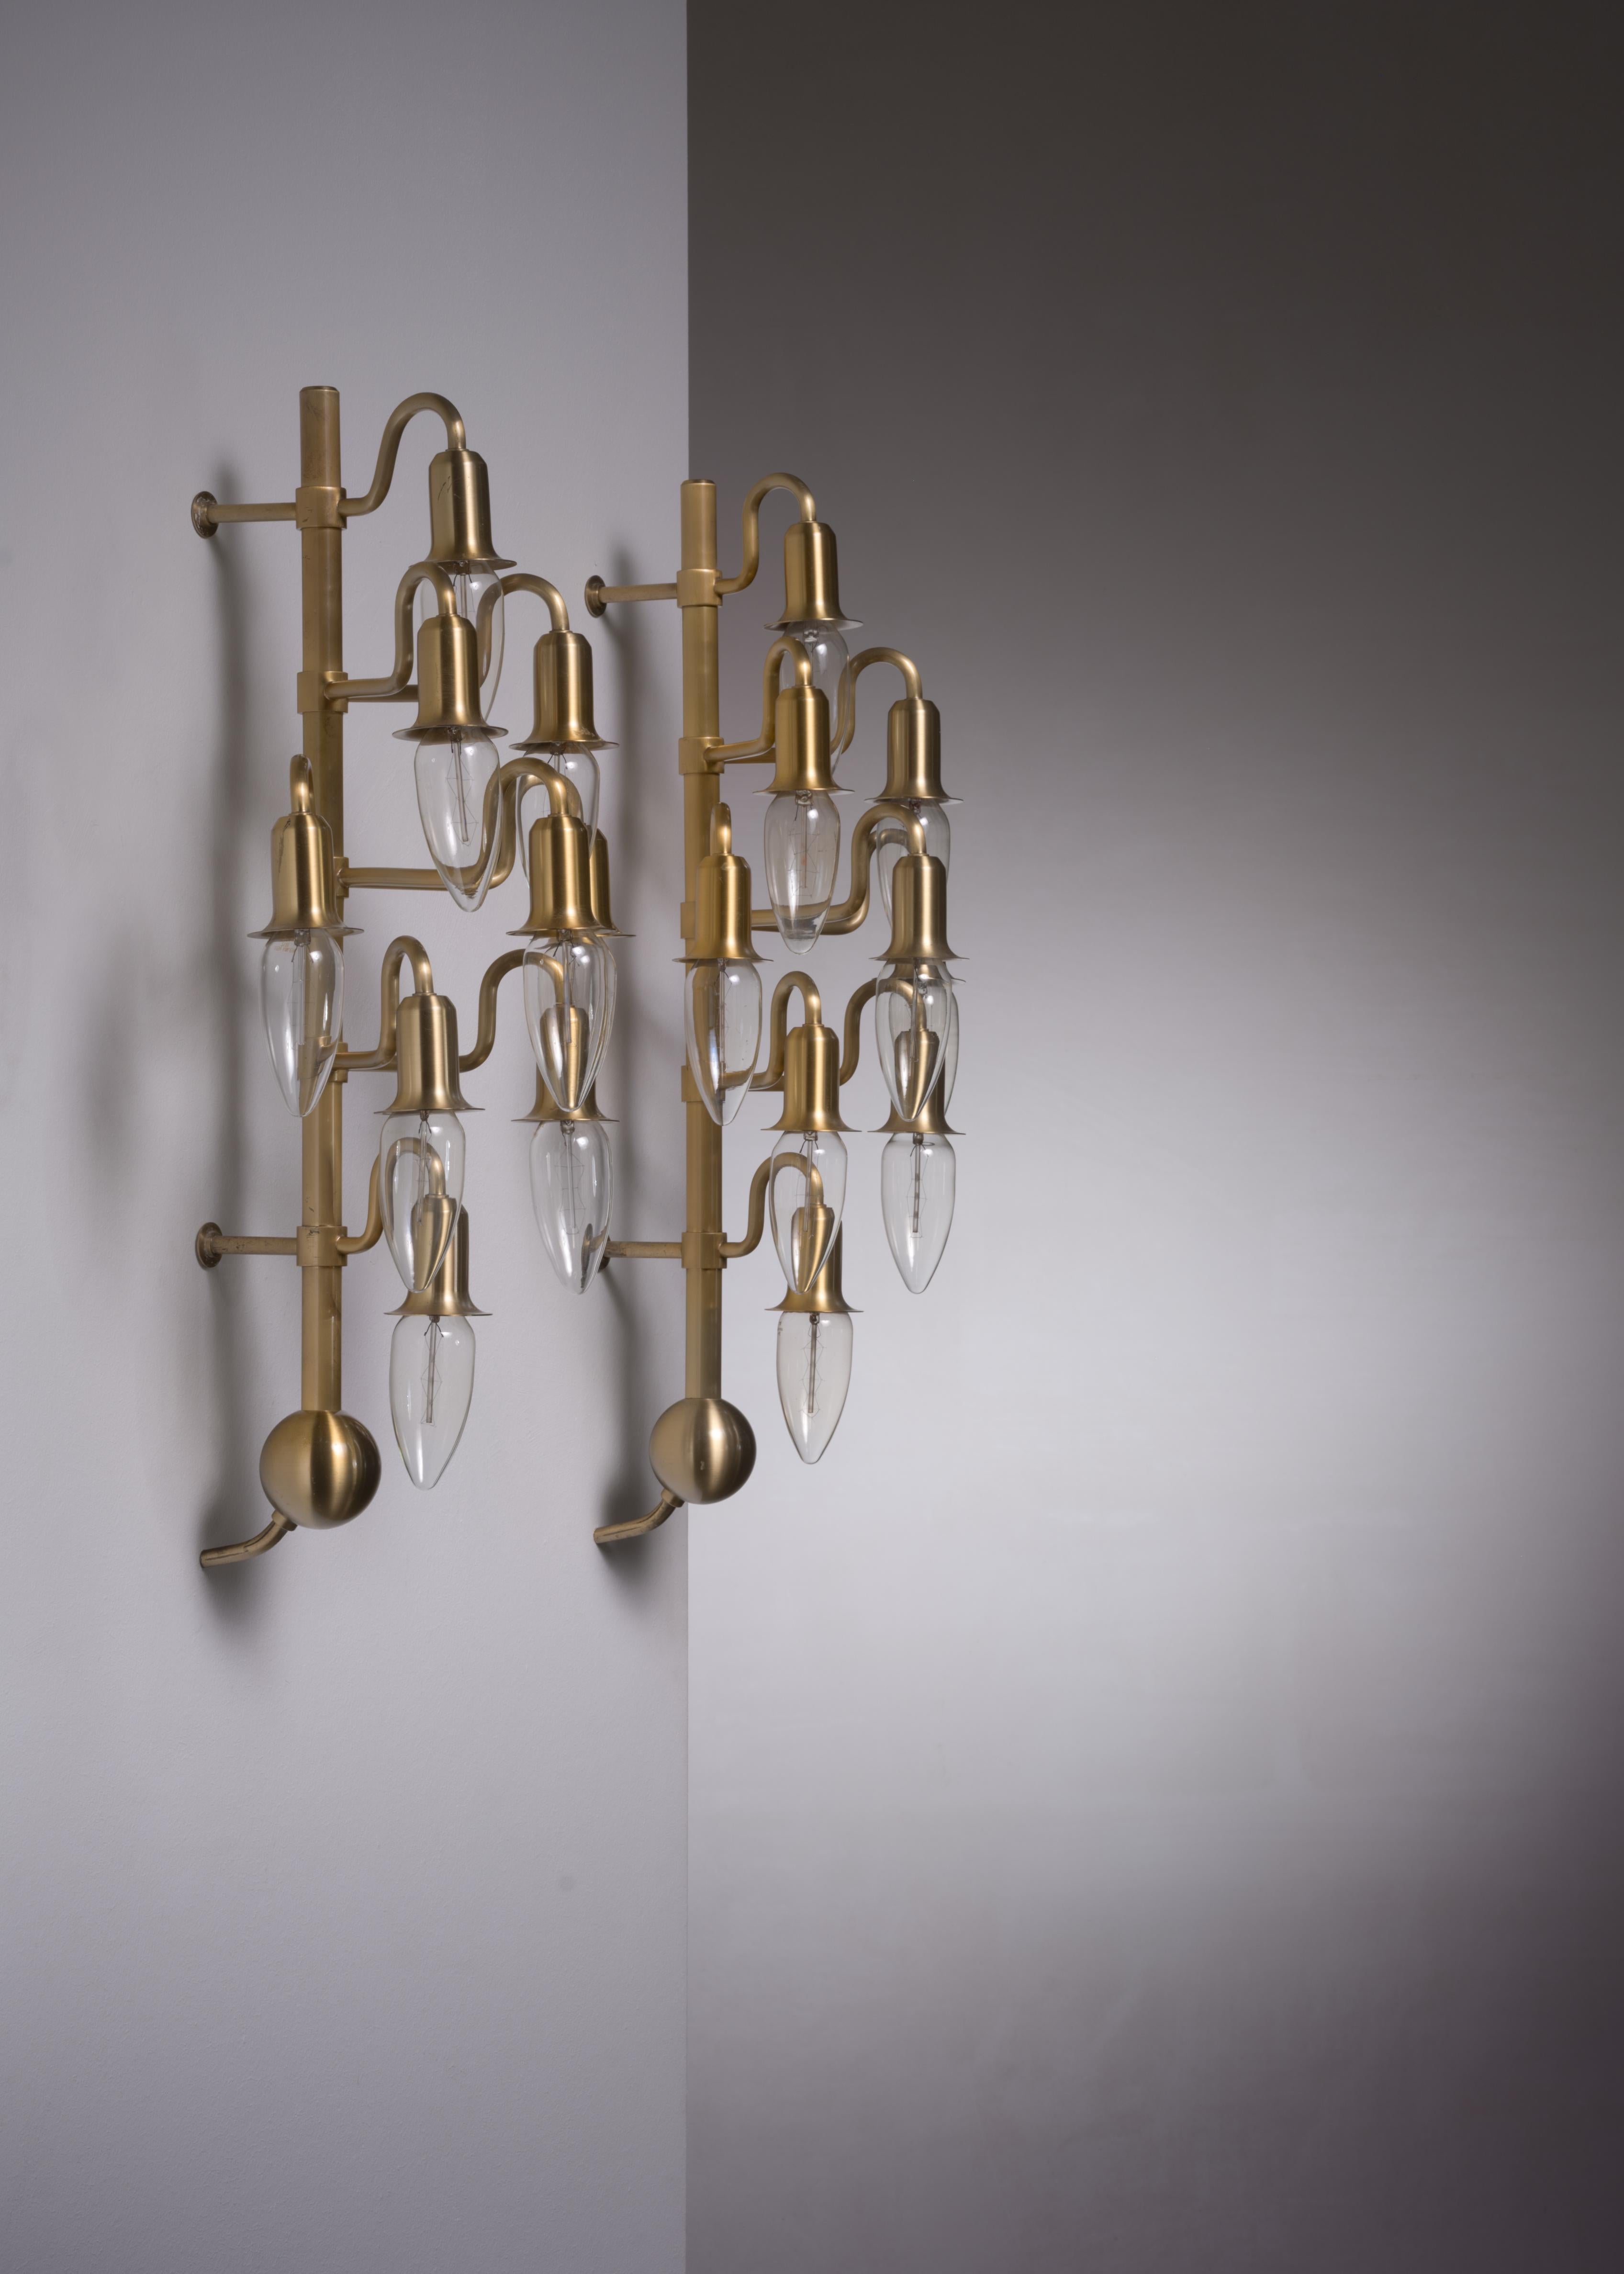 A pair of brass wall lamps with nine arms each.